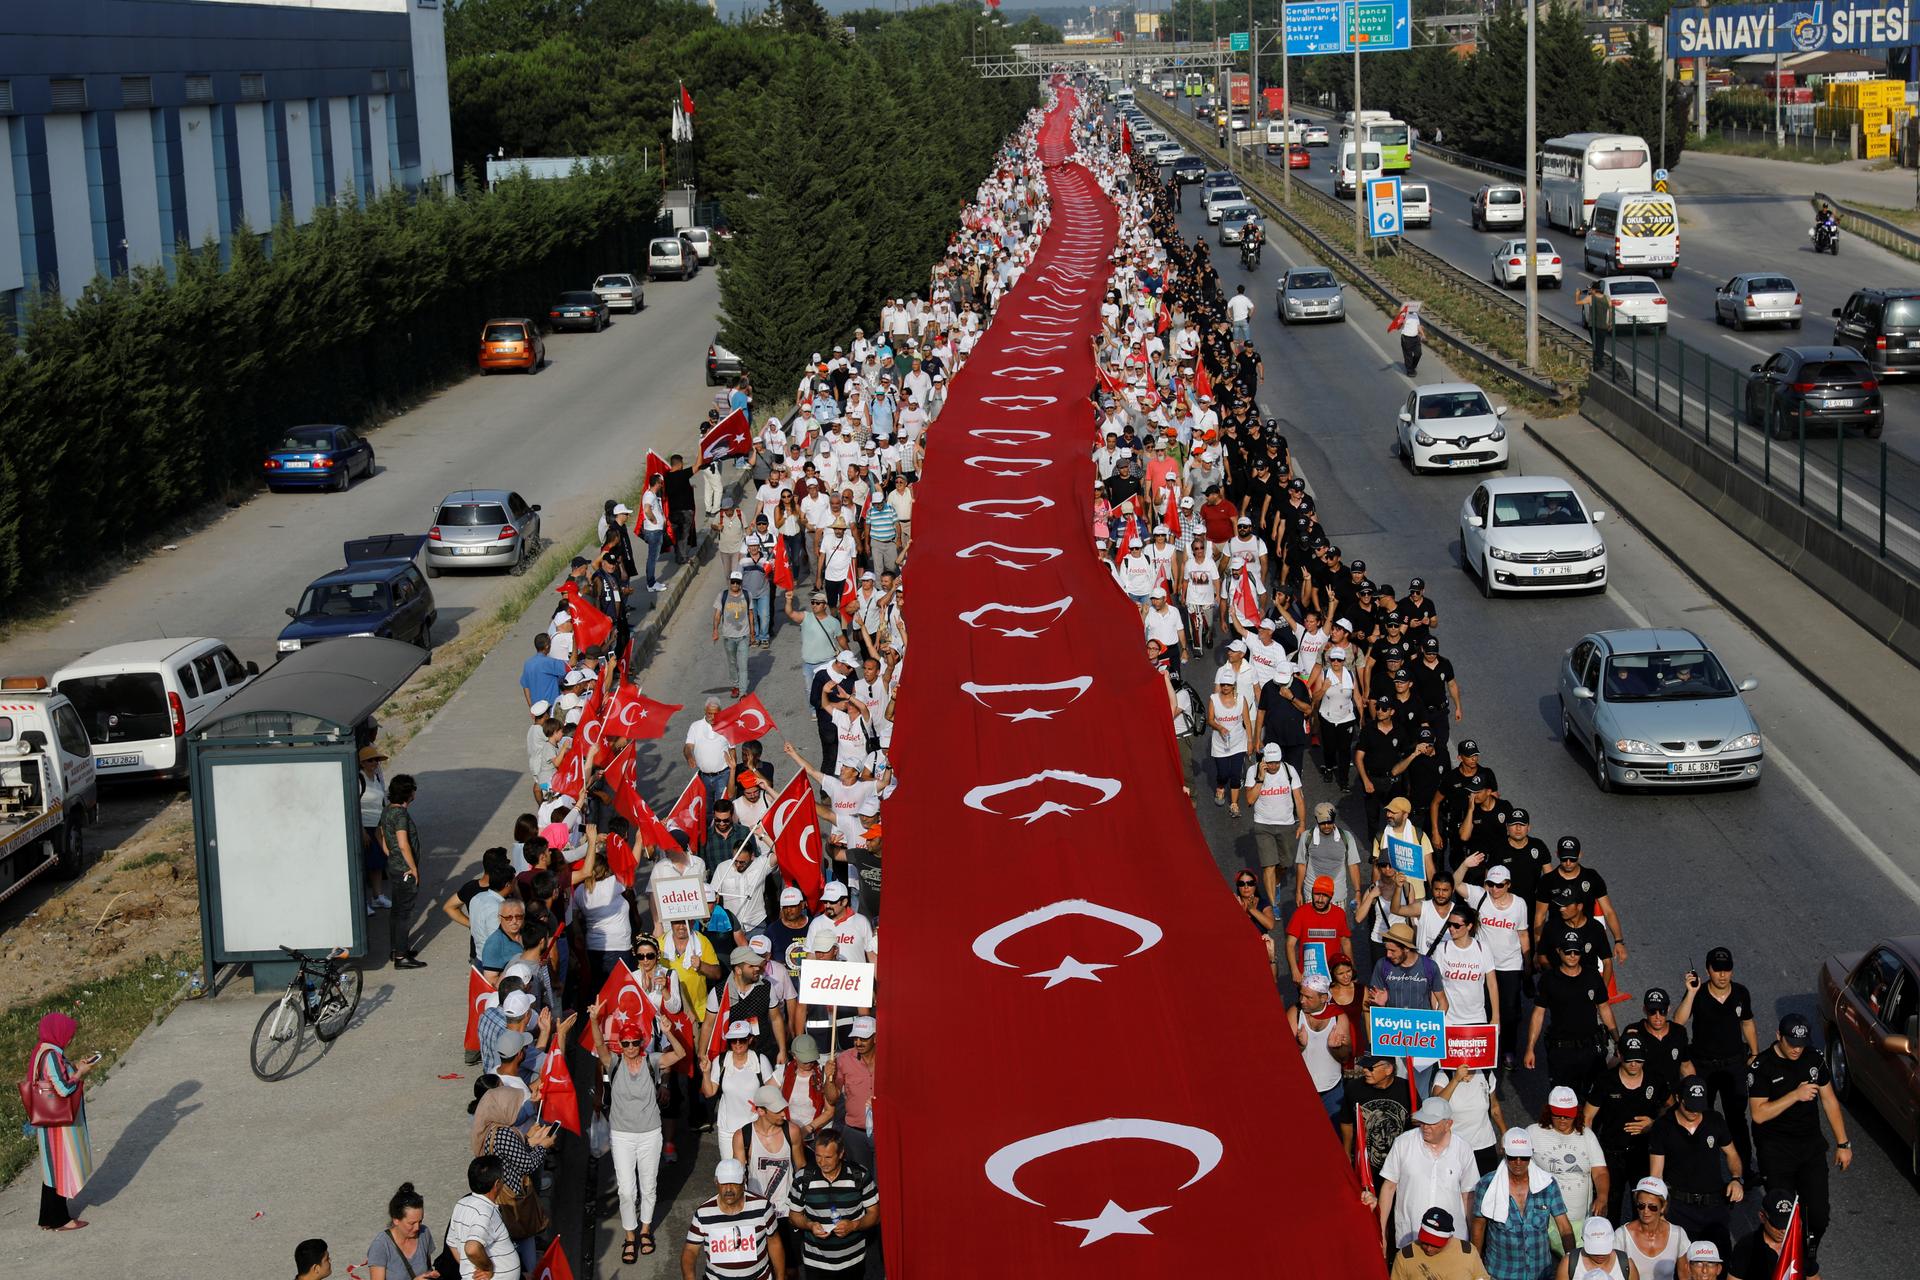 Supporters of Turkey's main opposition Republican People's Party leader Kemal Kilicdaroglu